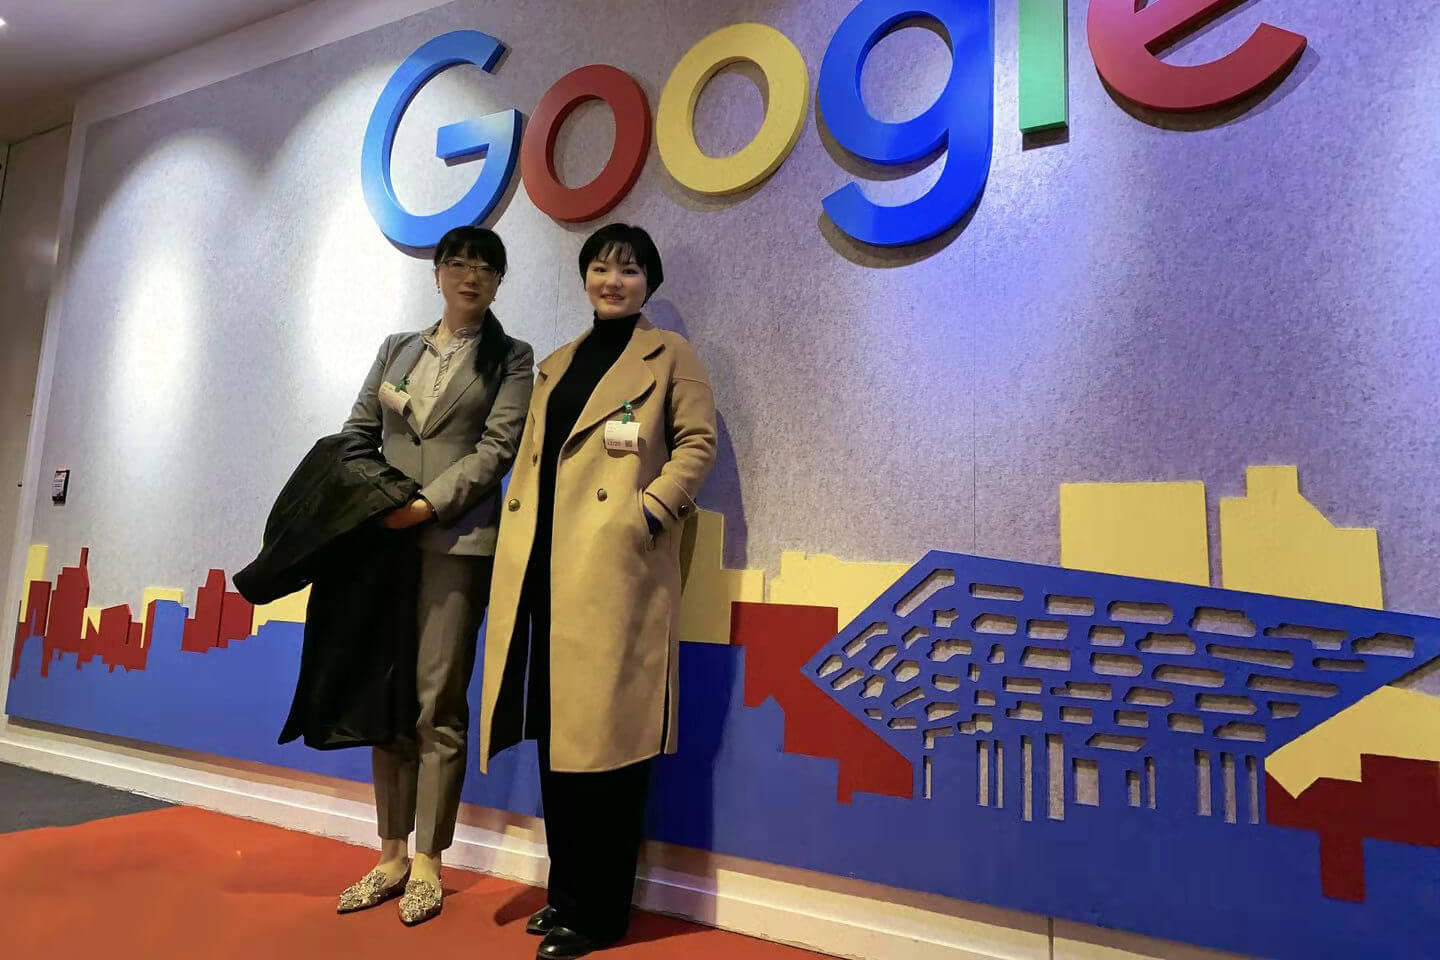 December 20, 2019, Google invited our company to share experience for trading companies